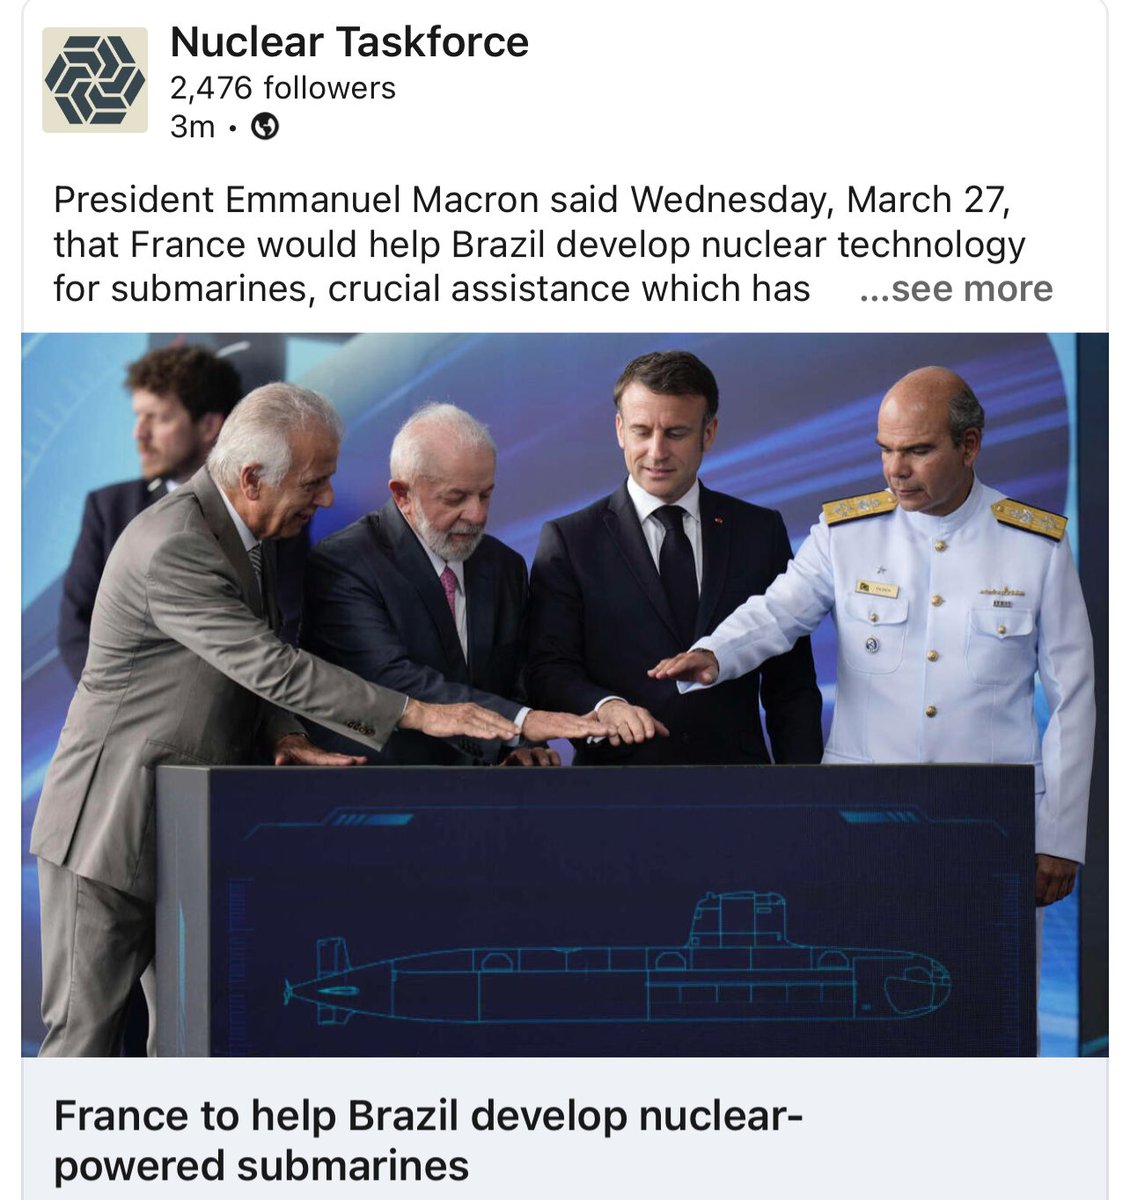 #Nuclear The French naval defense manufacturer Naval Group is supporting the design and construction of the submarine, except for the nuclear boiler which is being designed by the Brazilians.